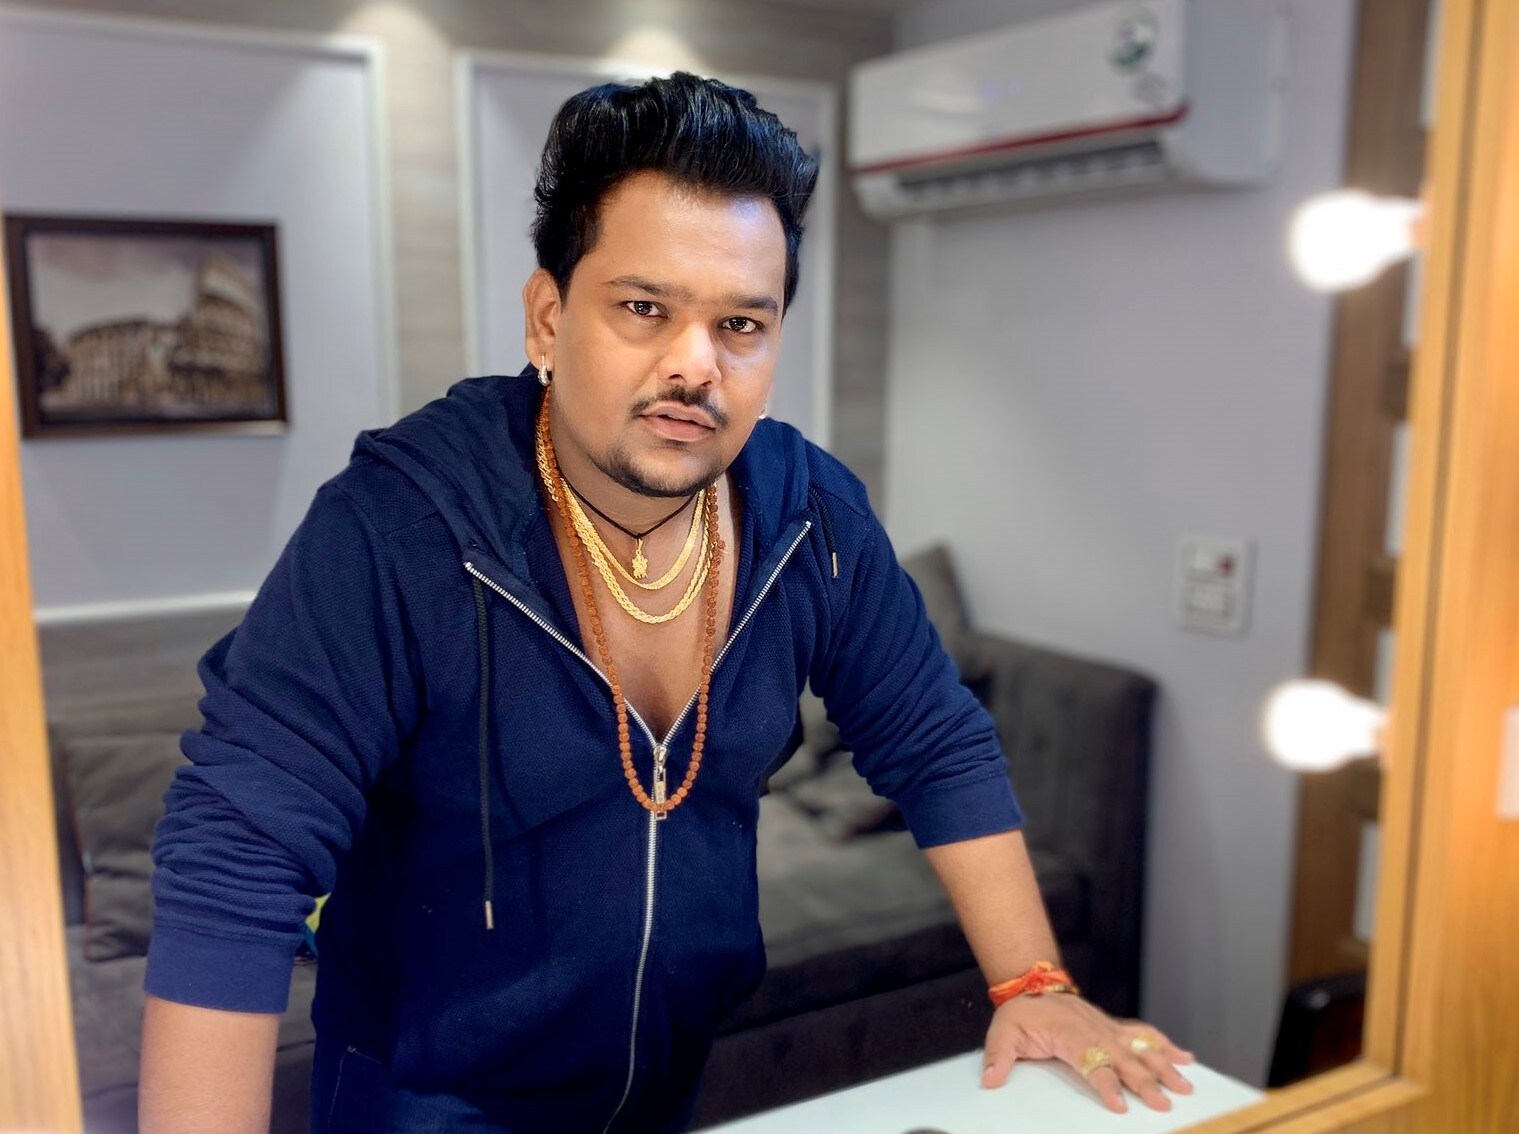  Mohit Baghel  | The actor was best known for playing the role of Amar Chaudhary in Salman Khan's Ready. He died of cancer on May 23. He was also seen in Sidharth Malhotra and Parineeti Chopra’s Jabariya Jodi. (Image: Twitter)